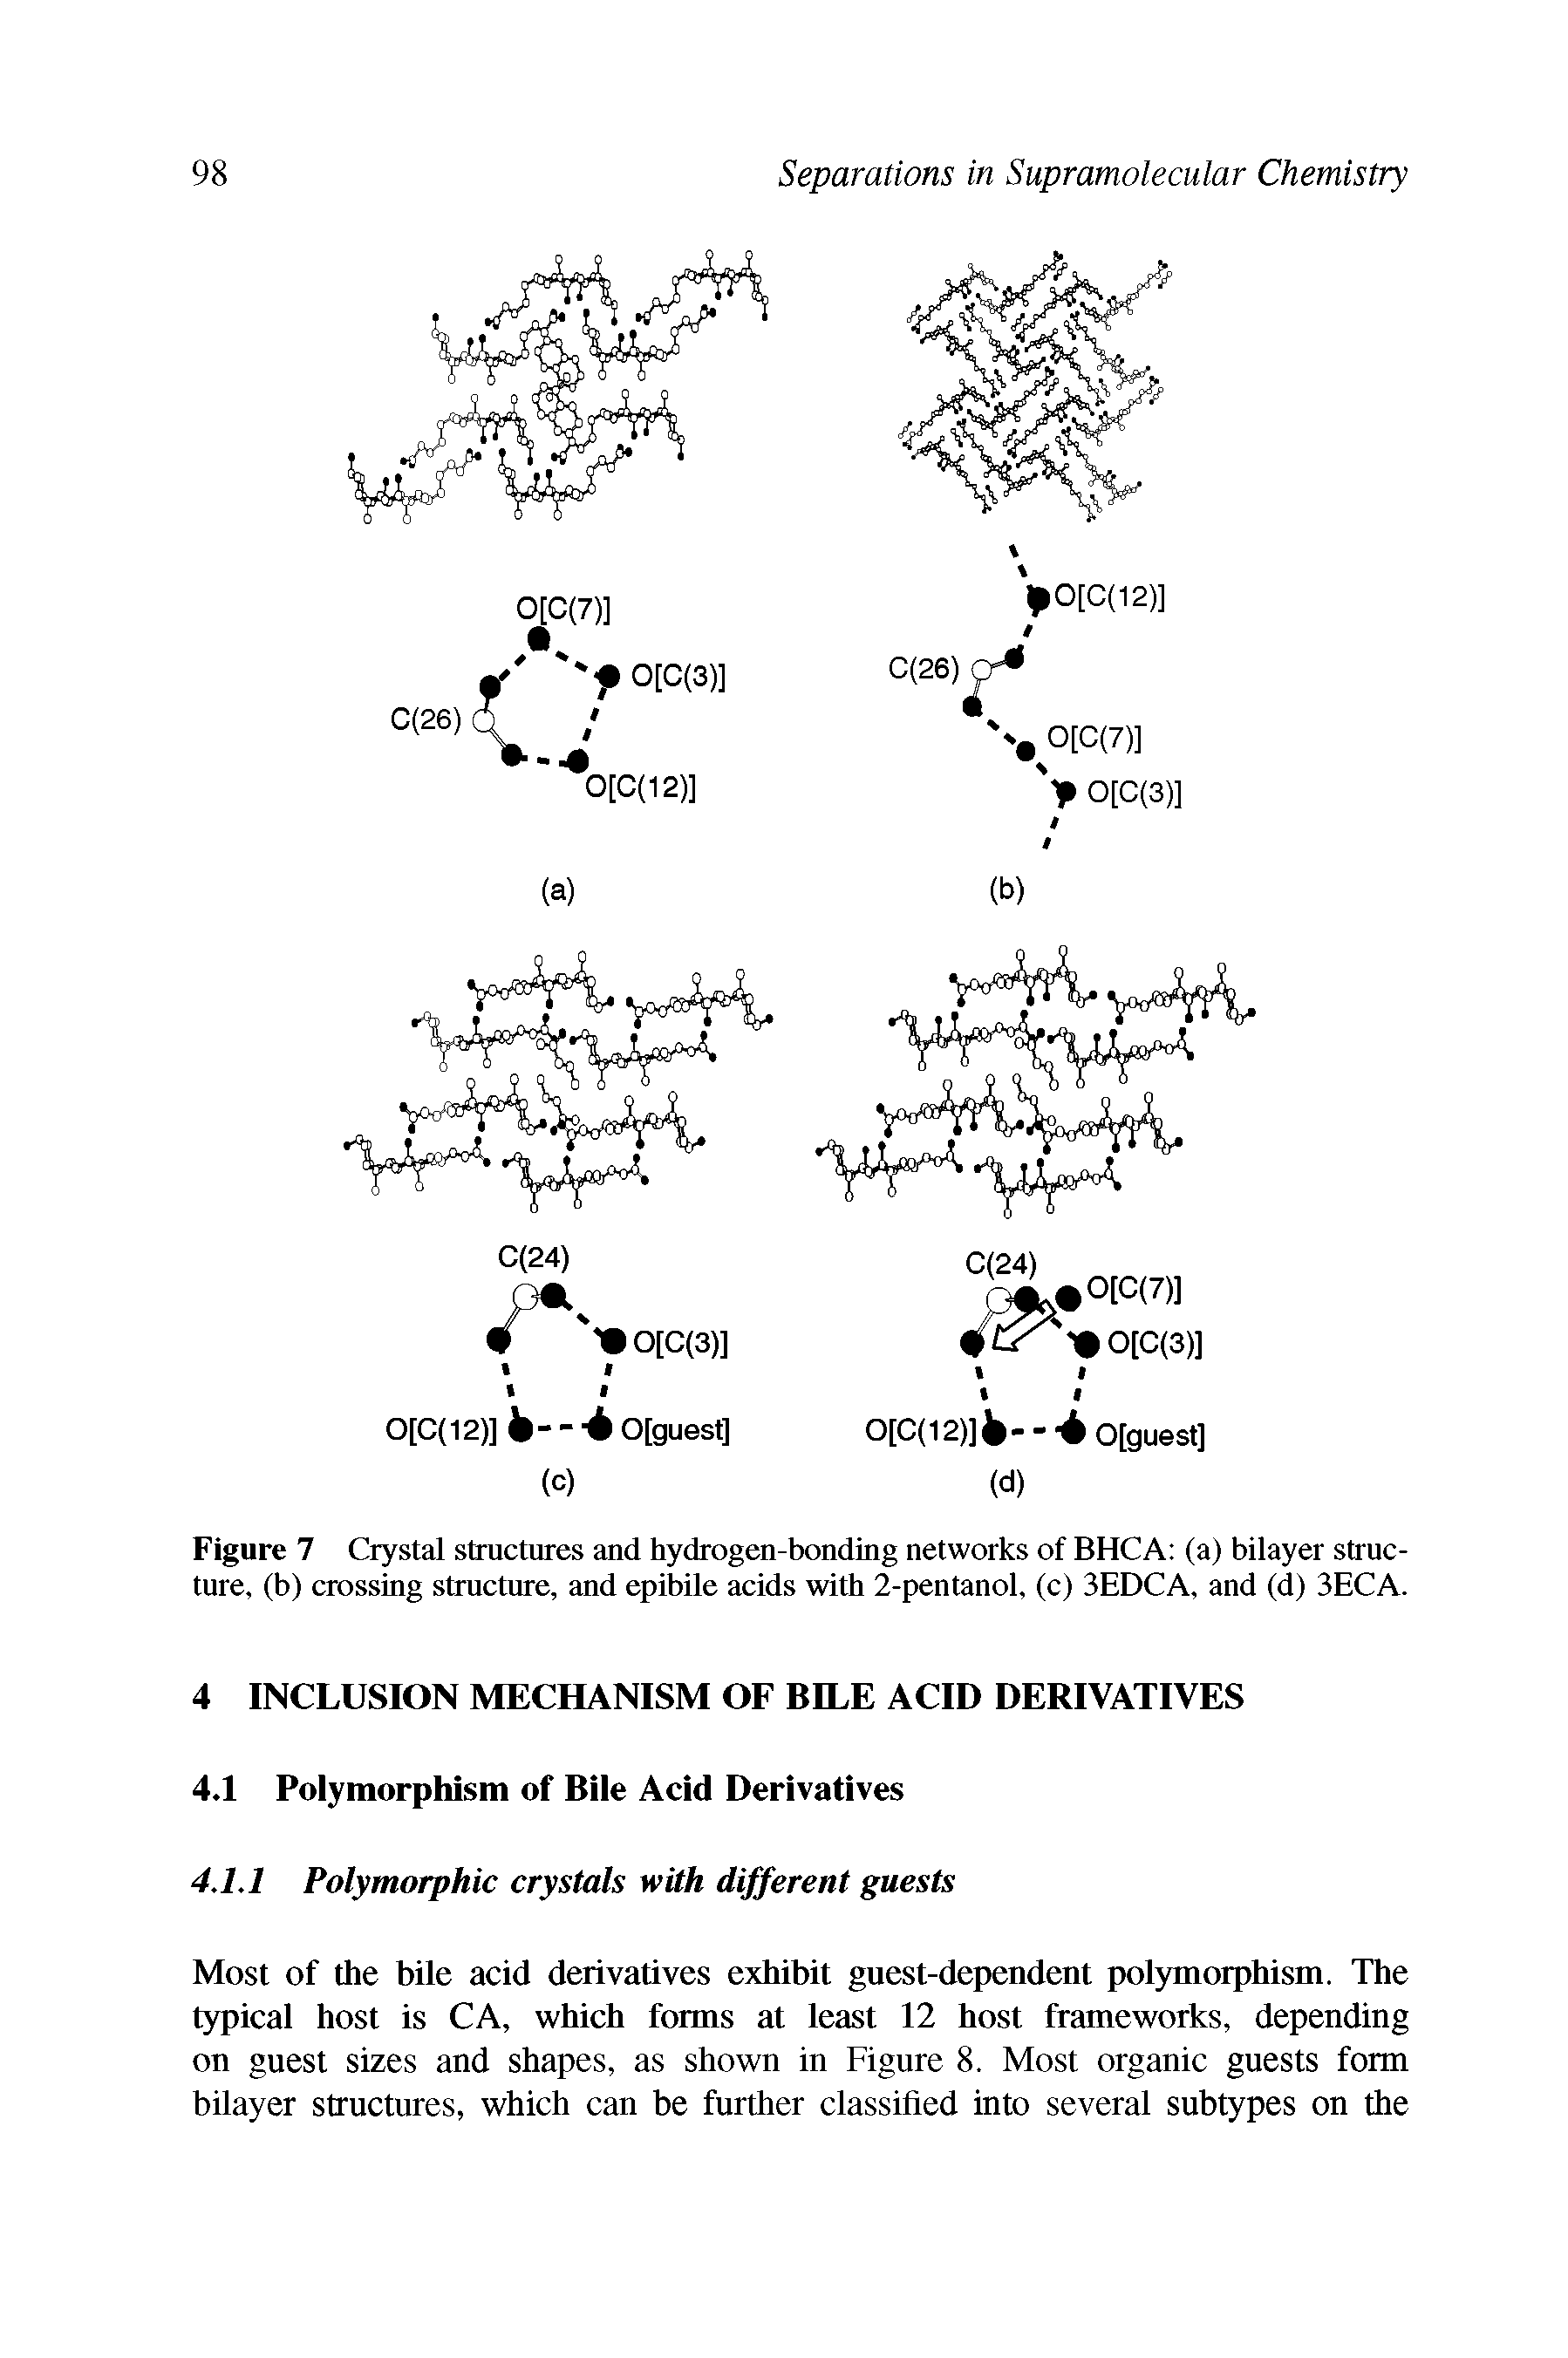 Figure 7 Crystal structures and hydrogen-bonding networks of BHCA (a) bilayer structure, (b) crossing structure, and epibile acids with 2-pentanol, (c) 3EDCA, and (d) 3ECA.